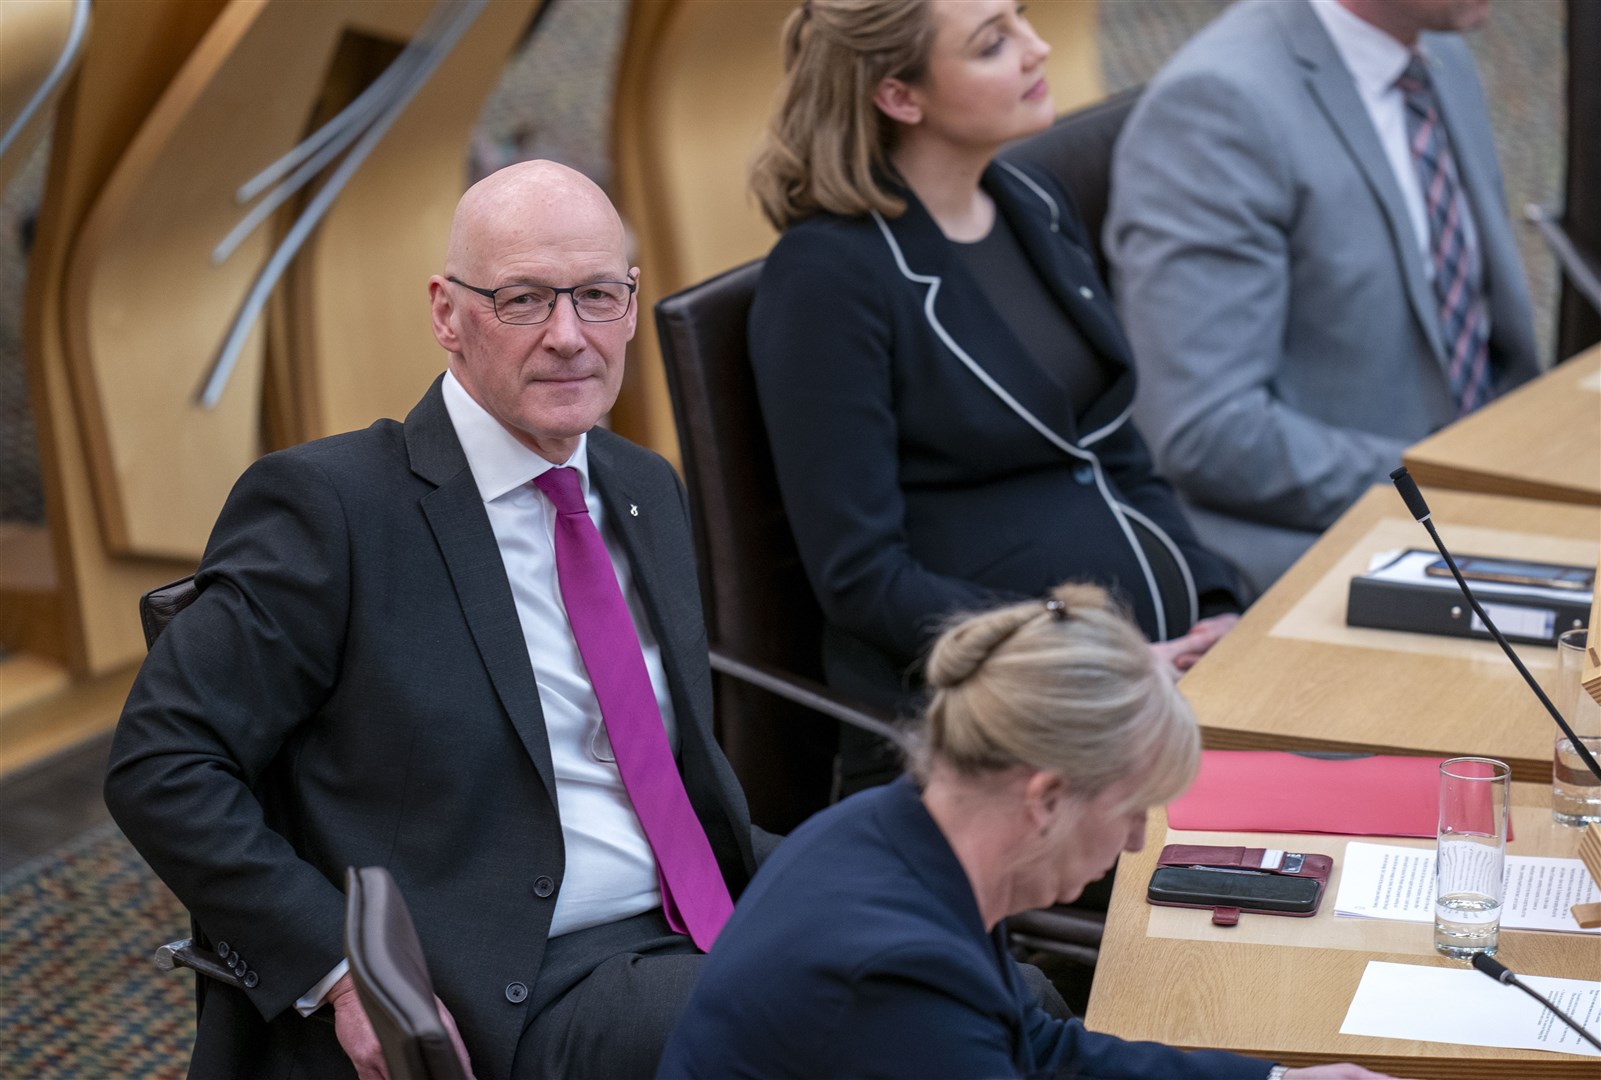 John Swinney in the main chamber at Holyrood after being voted in as First Minister on Tuesday (Jane Barlow/PA)